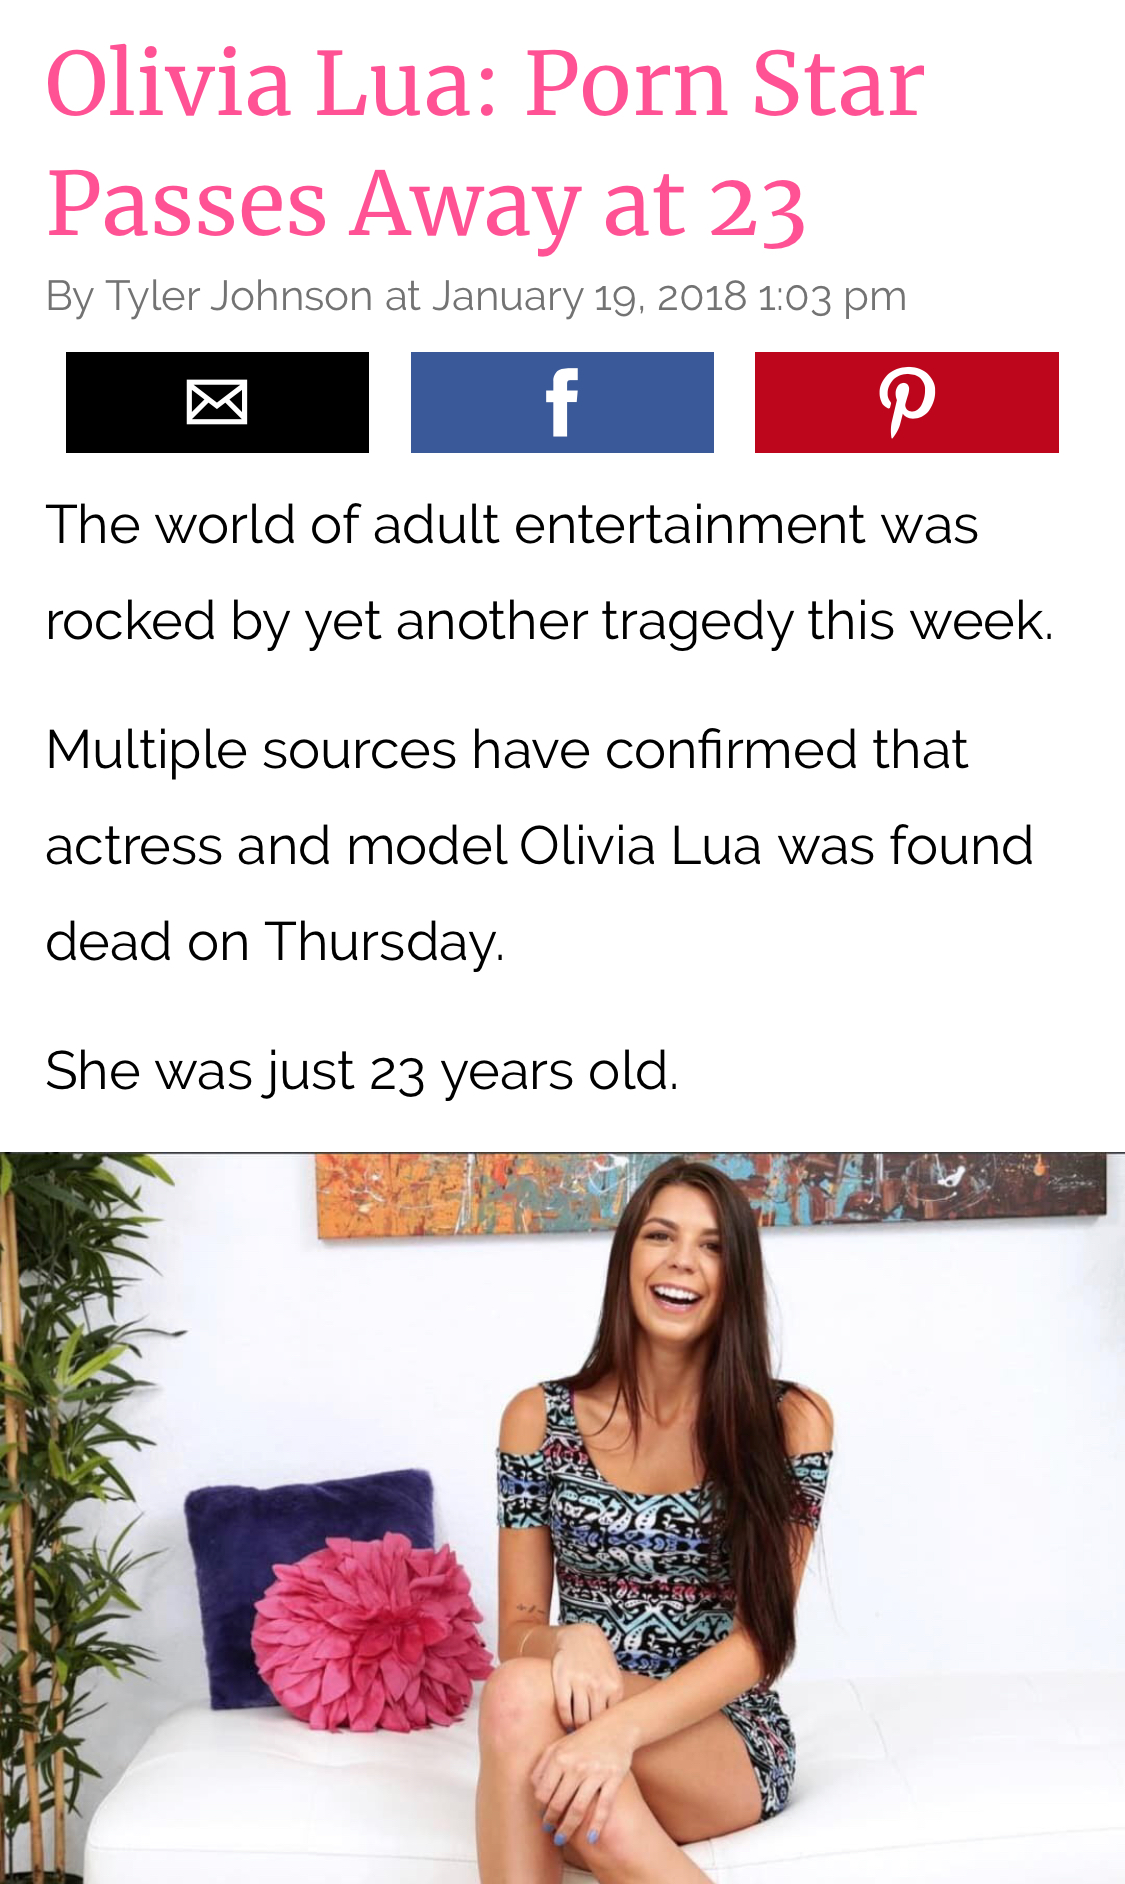 olivia lua - Olivia Lua Porn Star Passes Away at 23 By Tyler Johnson at f The world of adult entertainment was rocked by yet another tragedy this week Multiple sources have confirmed that actress and model Olivia Lua was found dead on Thursday She was jus